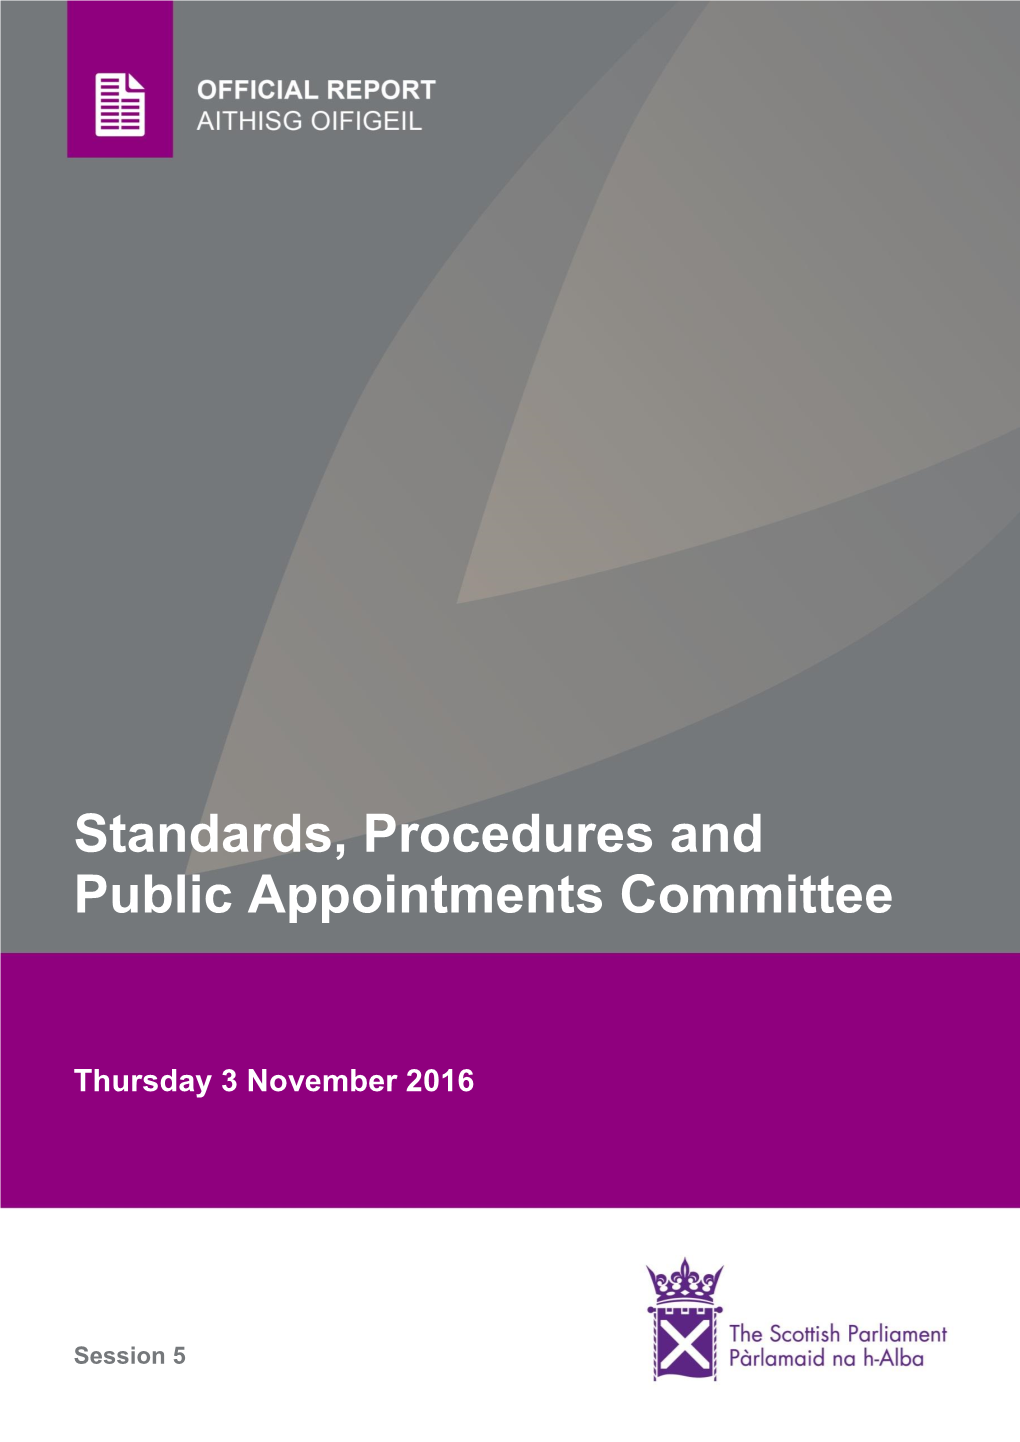 Standards, Procedures and Public Appointments Committee